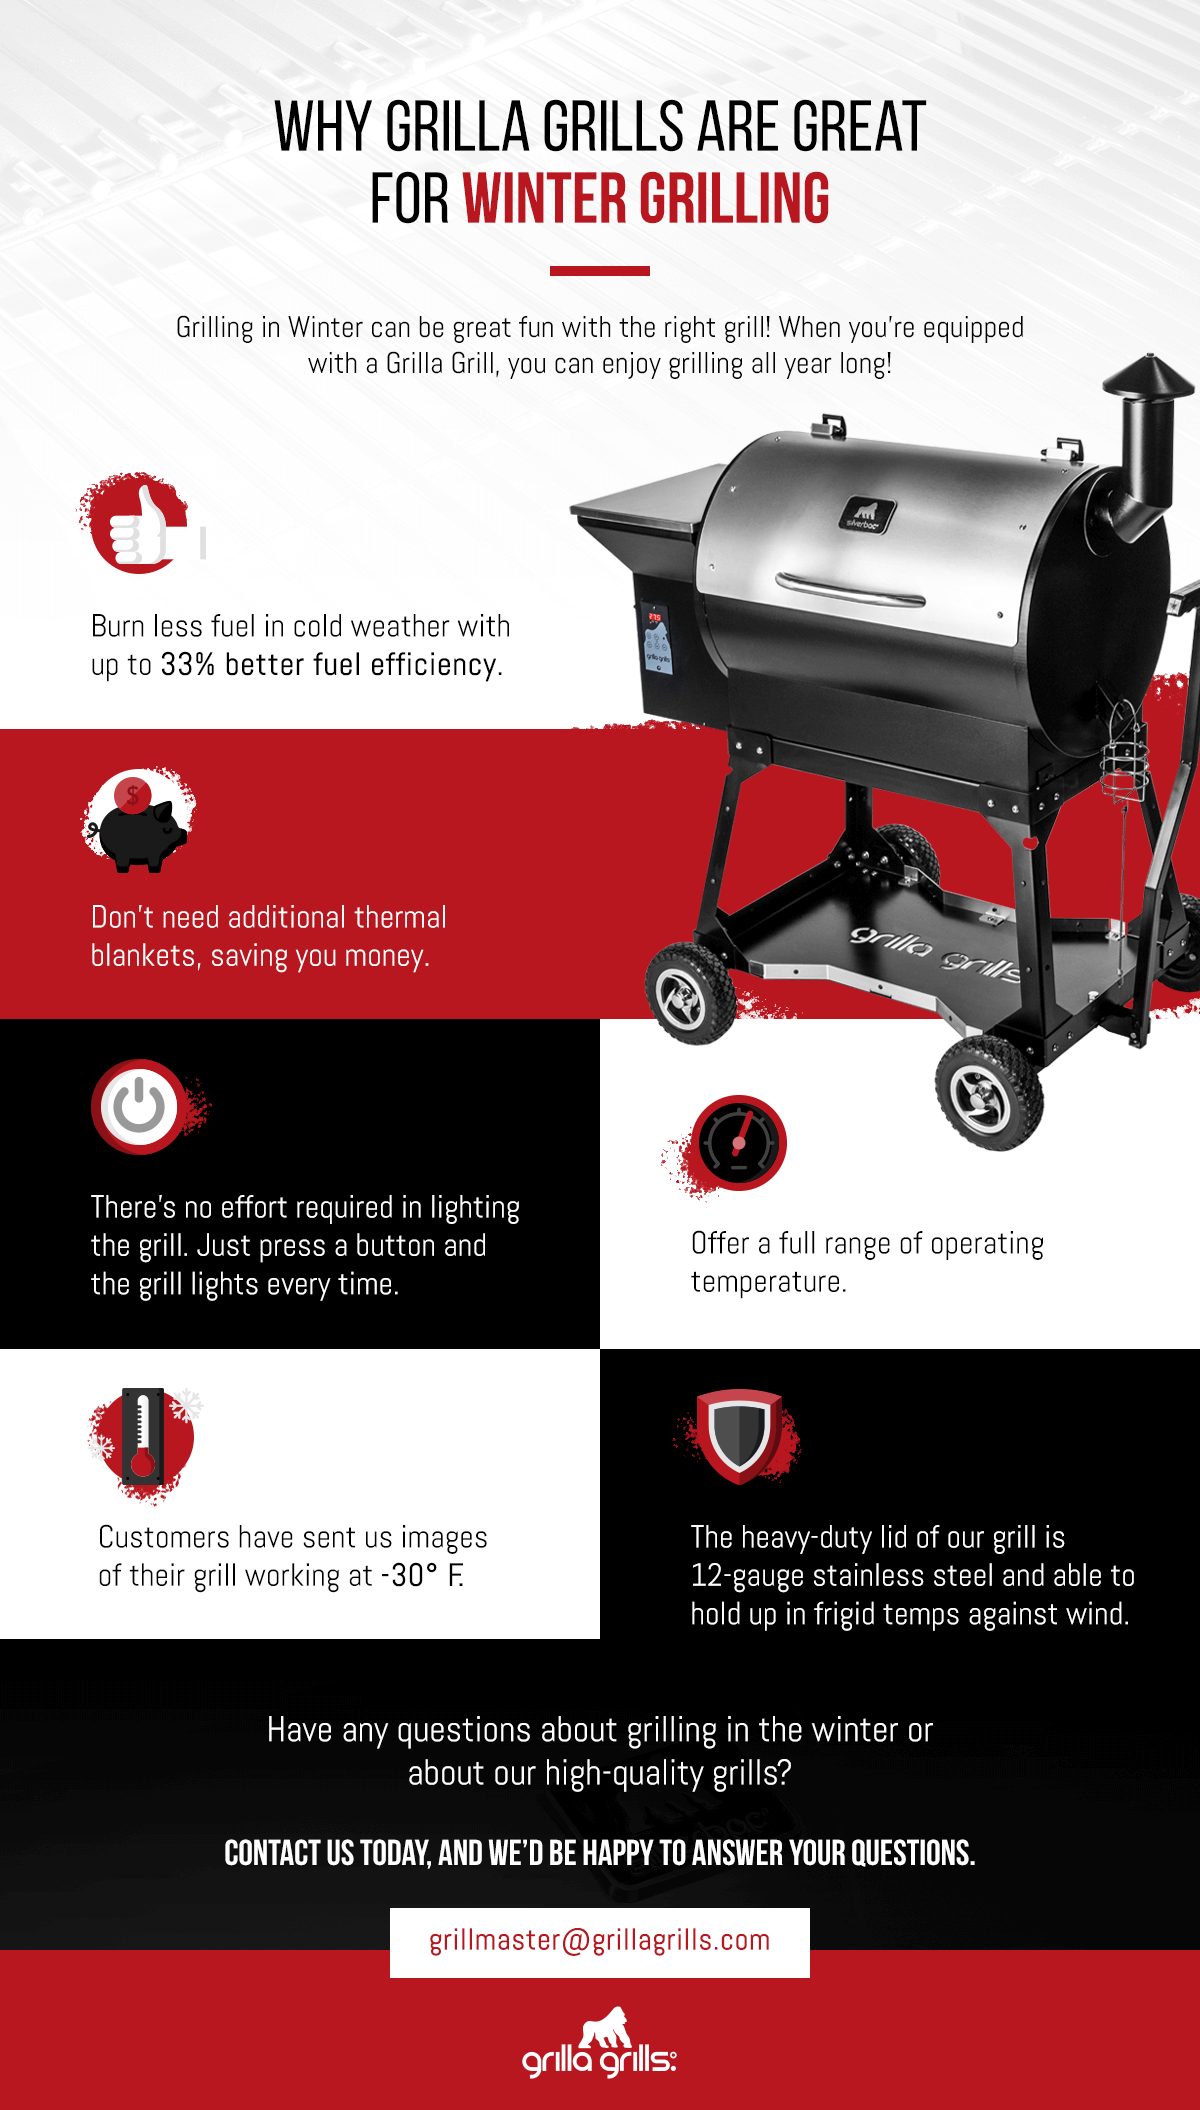 winter grilling with pellet grills - why grilla grills are great